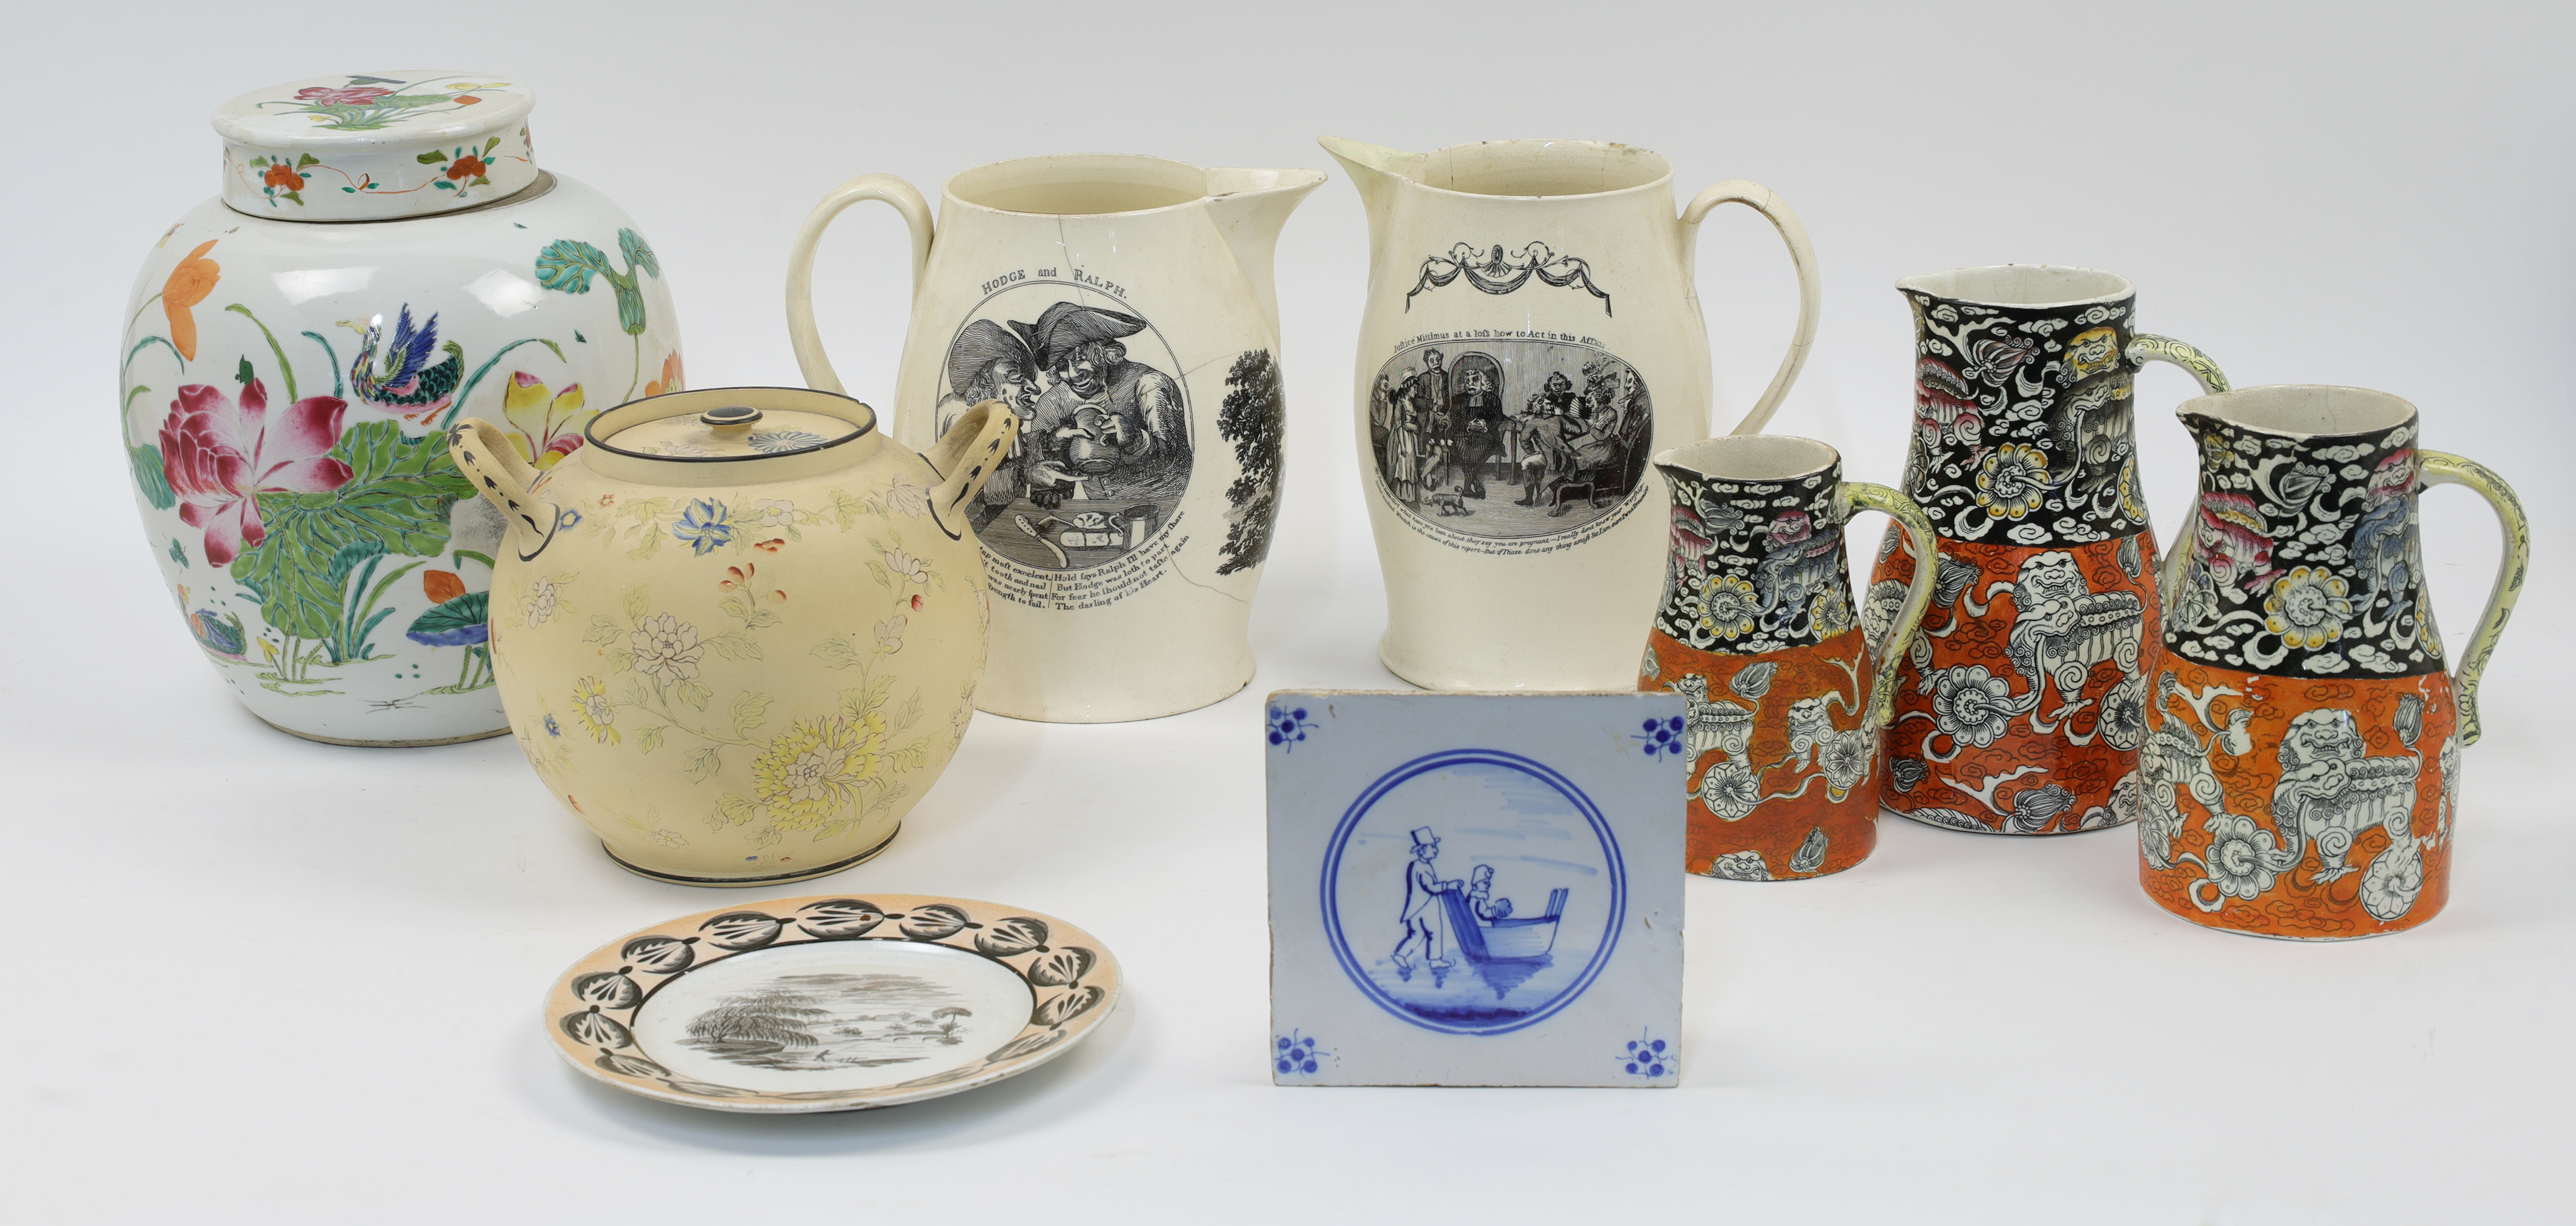 A quantity of mostly Staffordshire pottery and porcelain, 19th century, comprising: a group of Ma... - Image 2 of 2